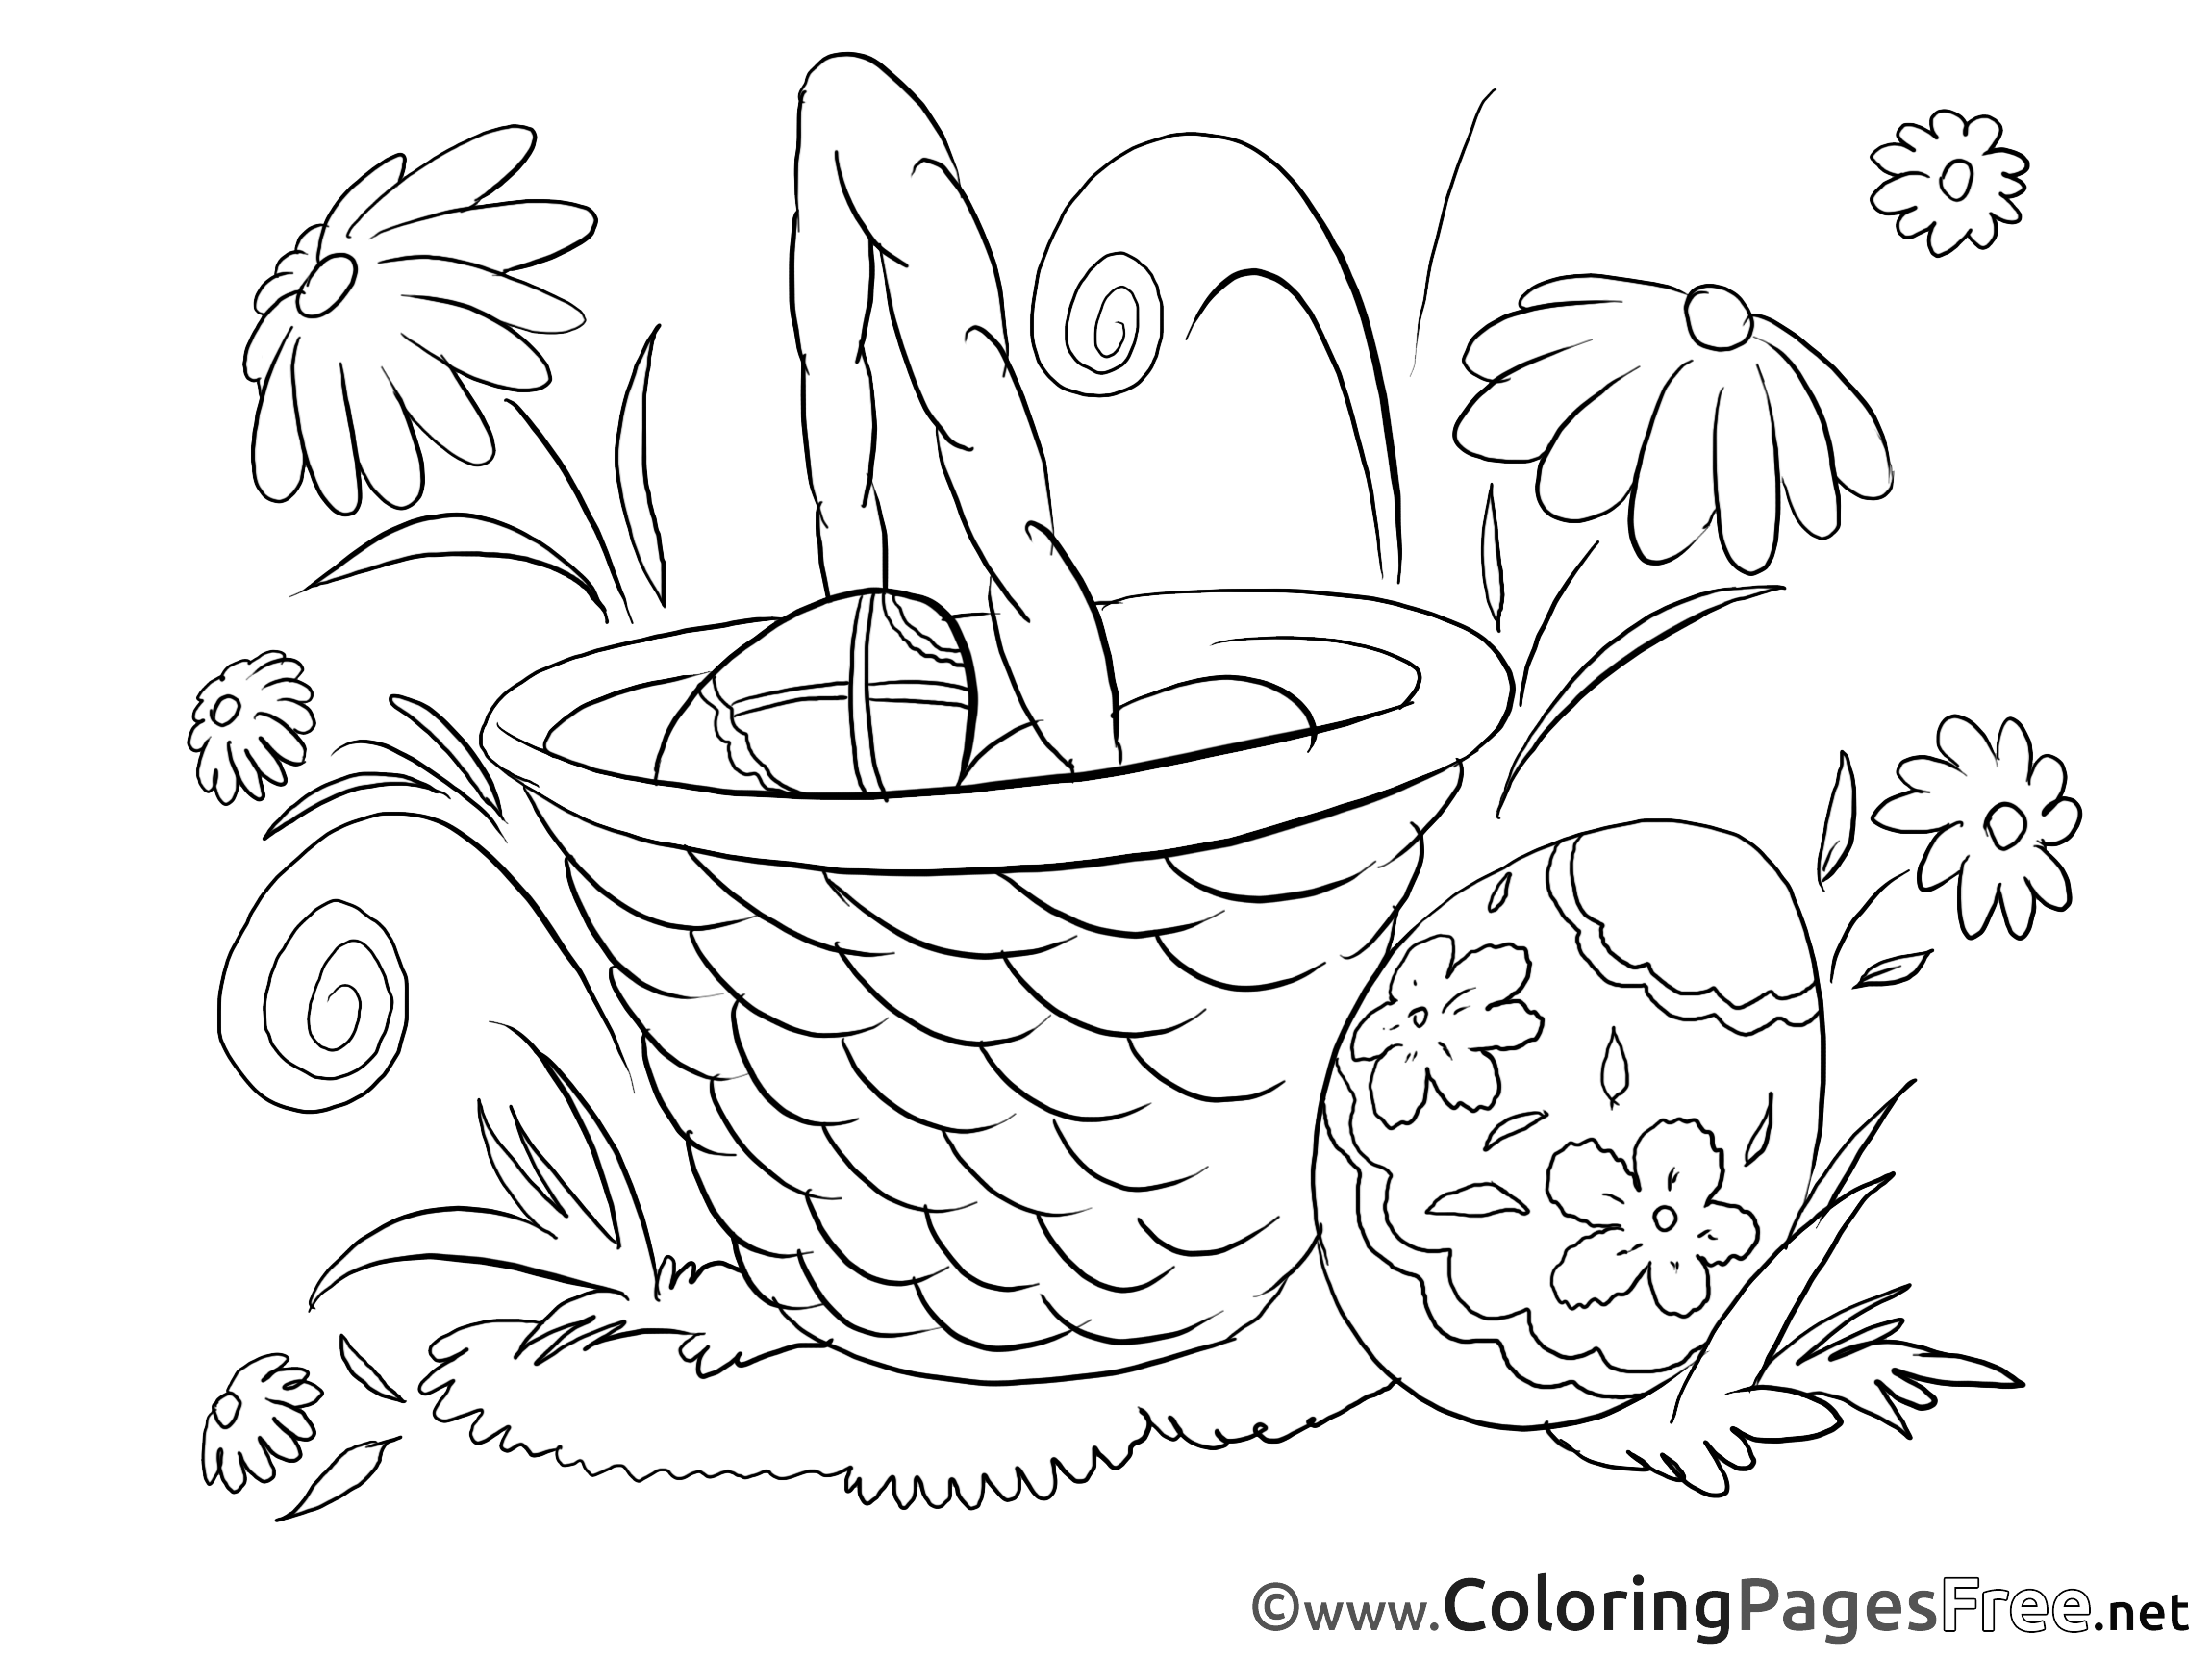 Download Flower Basket Coloring Pages | Coloring Your Life